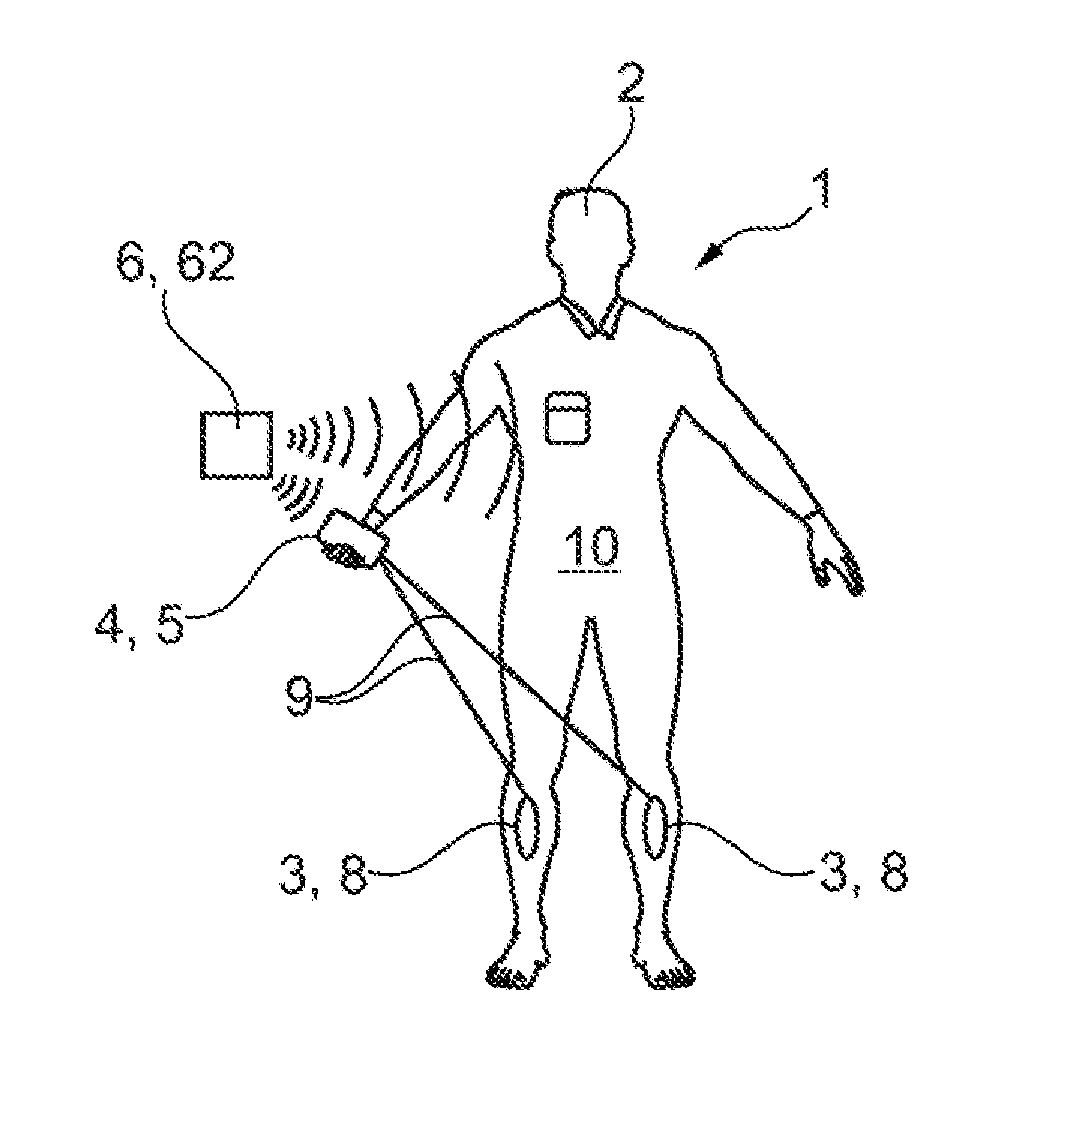 System for controlling stimulation impulses